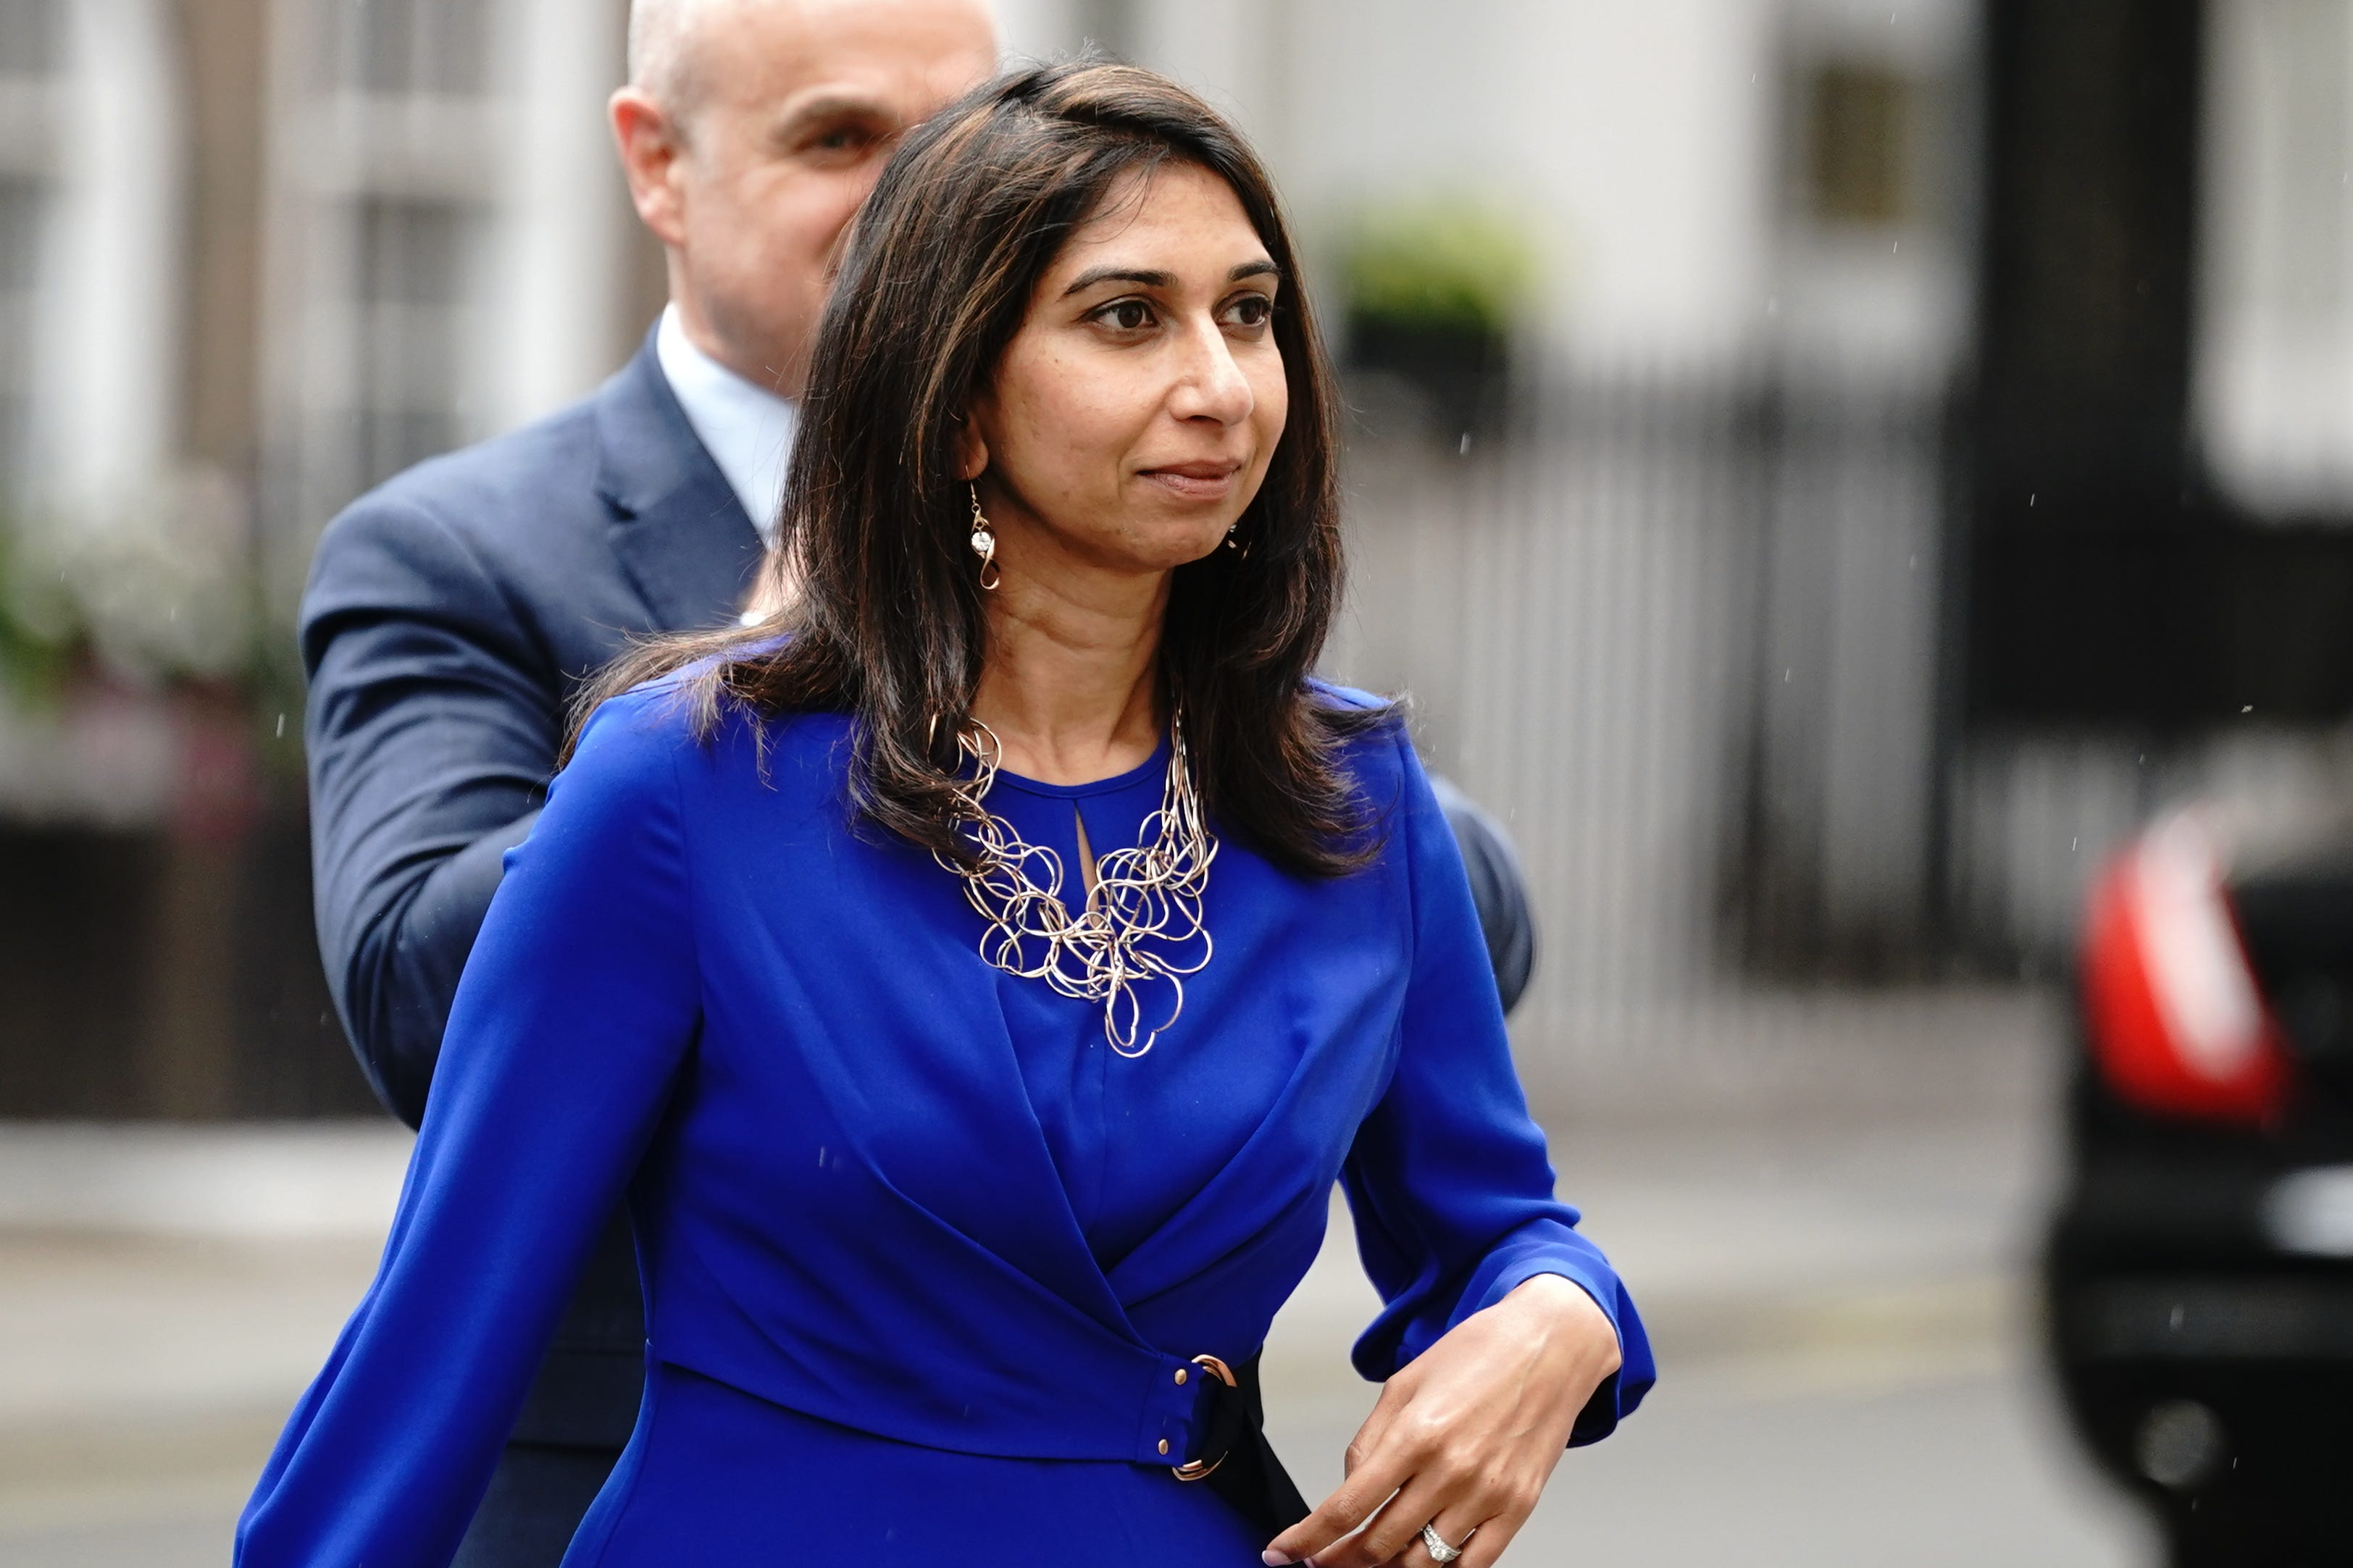 Suella Braverman urged MPs and peers to back the Bill to stop the boats (Victoria Jones/PA)